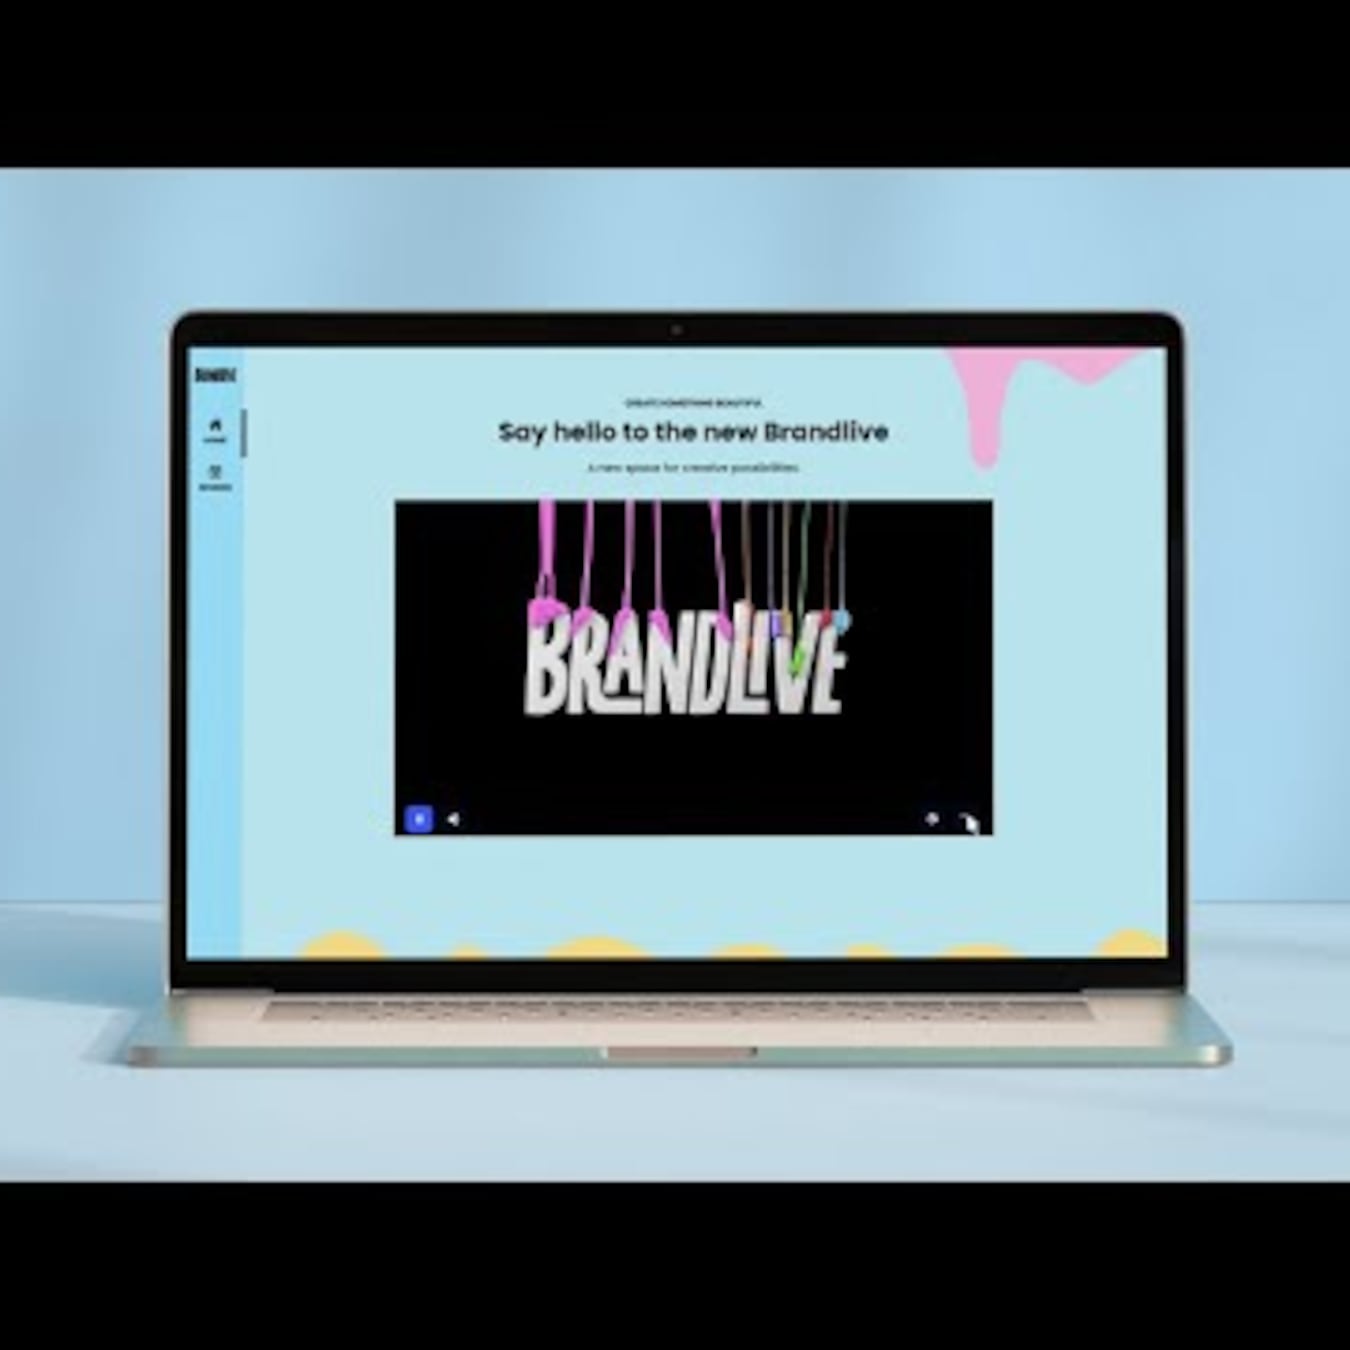 Project-Say Hello to the new Brandlive